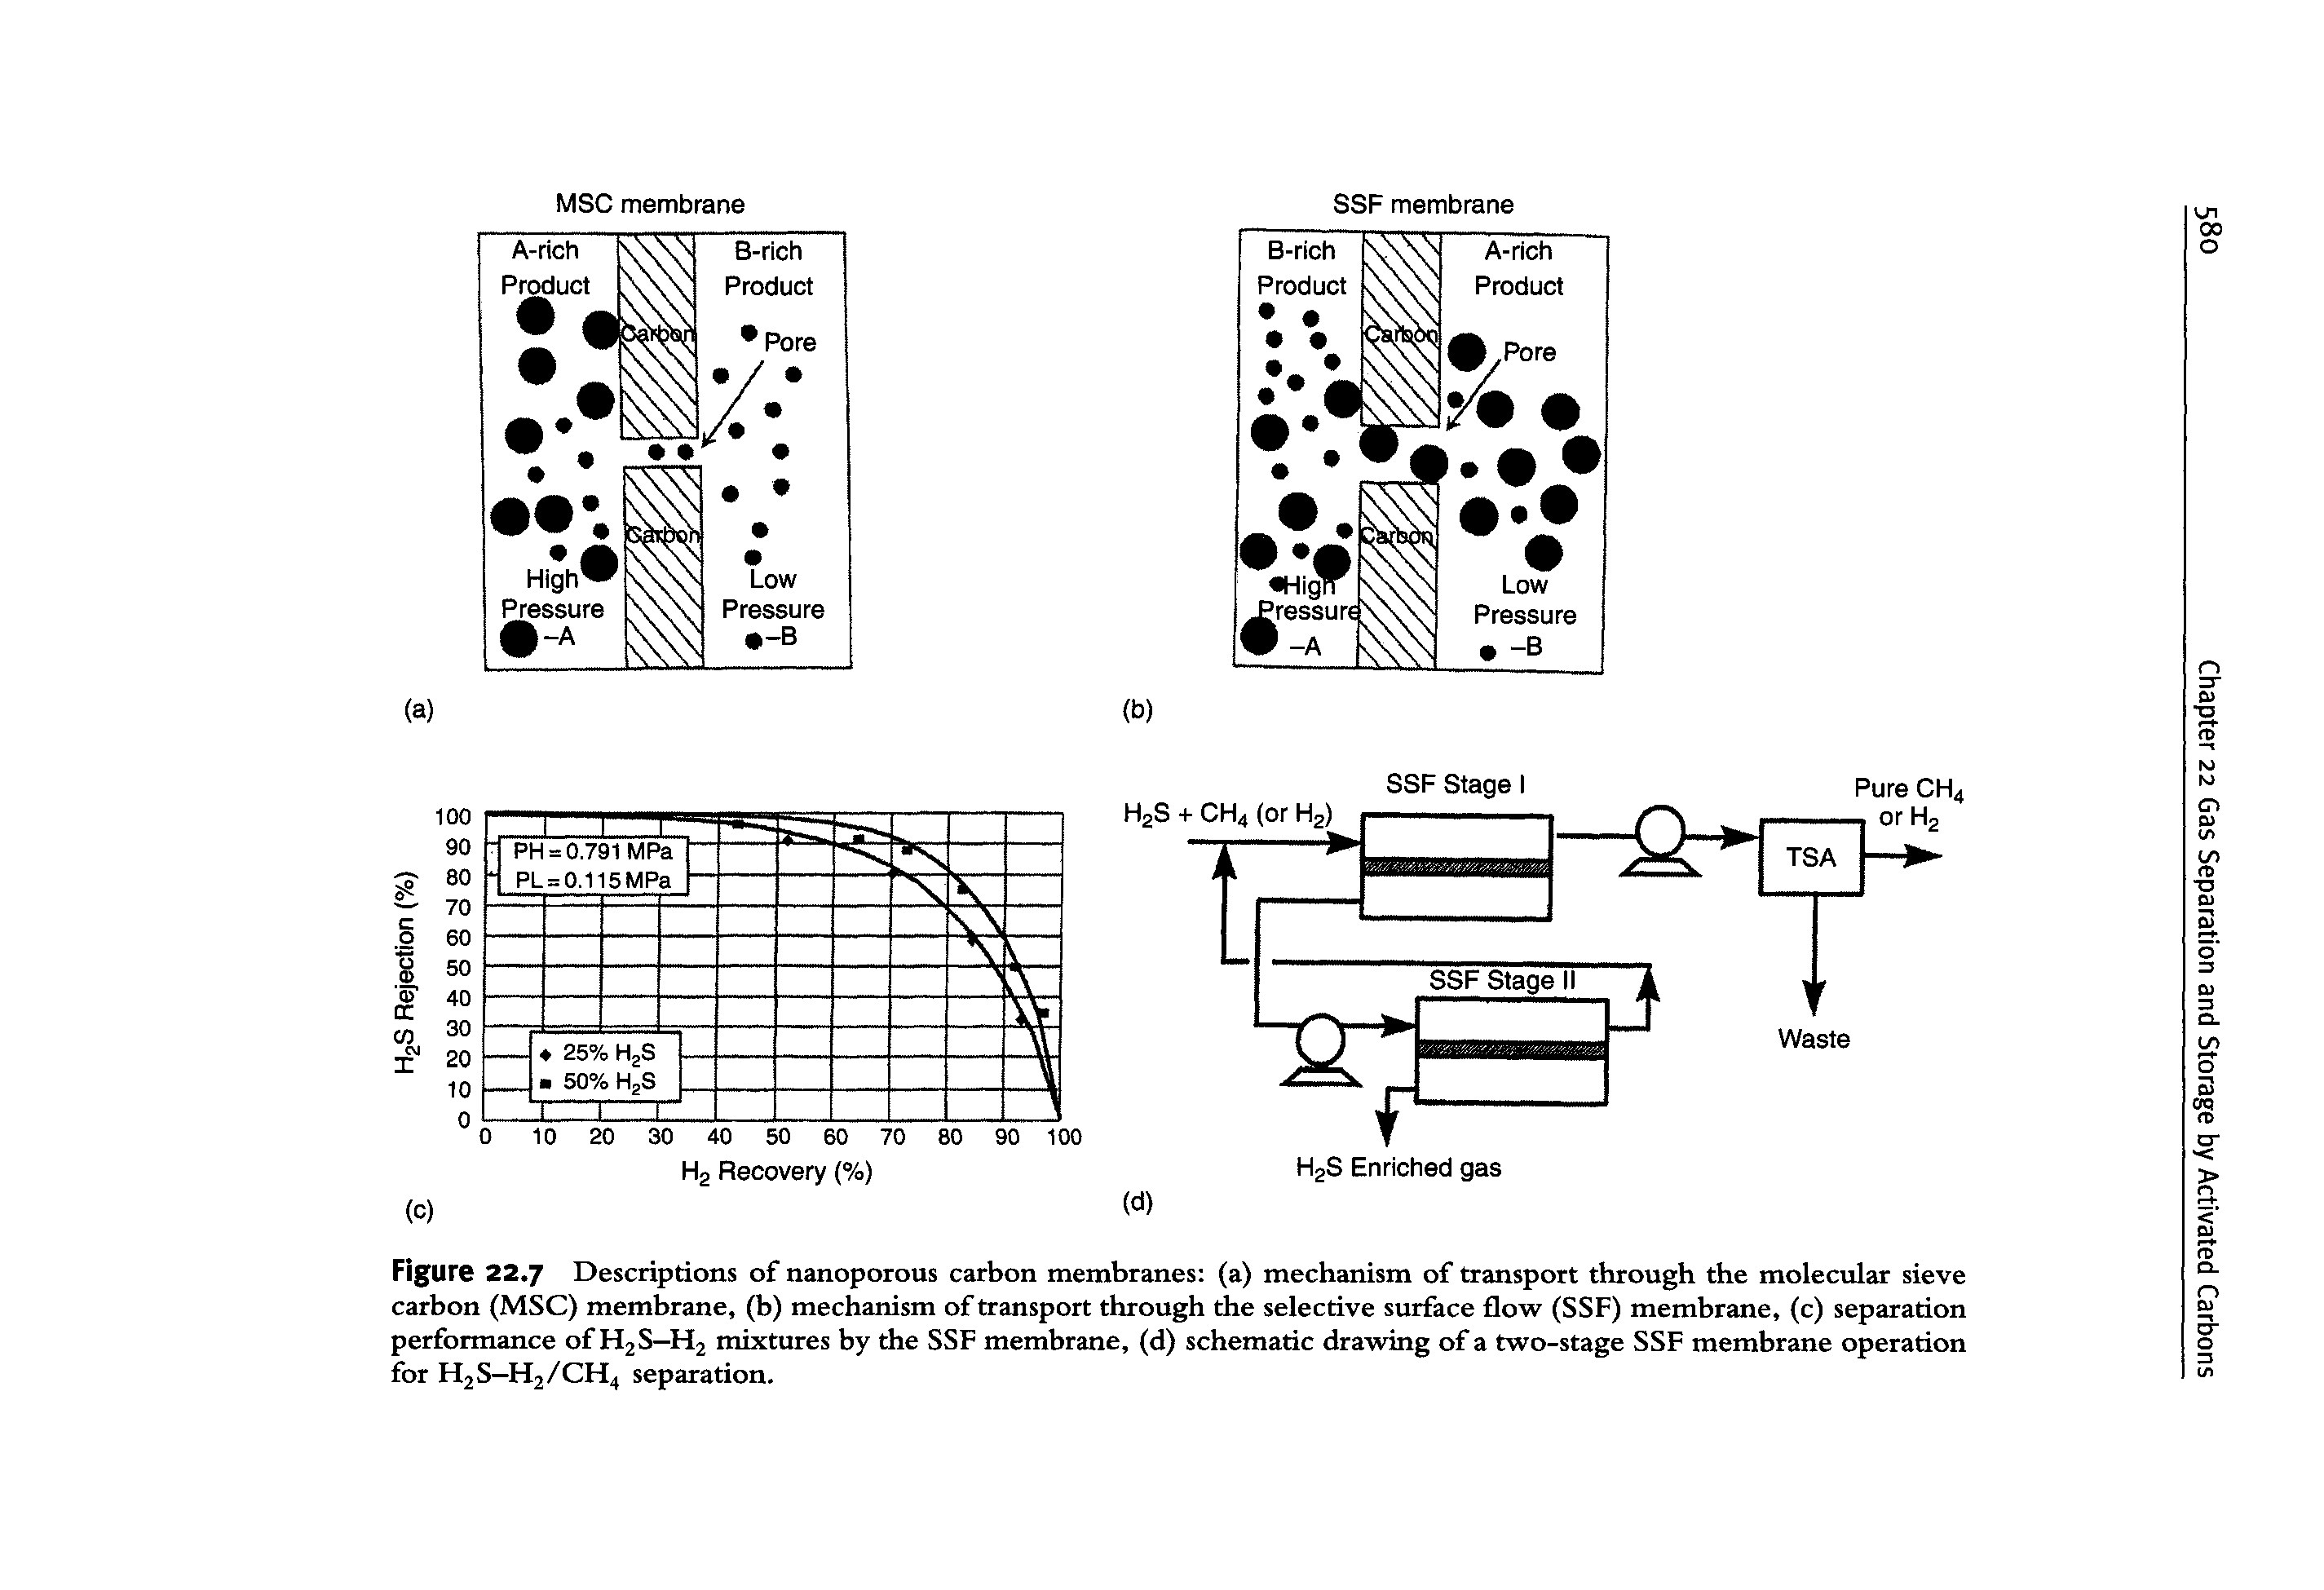 Figure 22.7 Descriptions of nanoporous carbon membranes (a) mechanism of transport through the molecular sieve carbon (MSC) membrane, (b) mechanism of transport through the selective surface flow (SSF) membrane, (c) separation performance of H2S—H2 mixtures by the SSF membrane, (d) schematic drawing of a two-stage SSF membrane operation for Fl2S—FI2/CH4 separation.